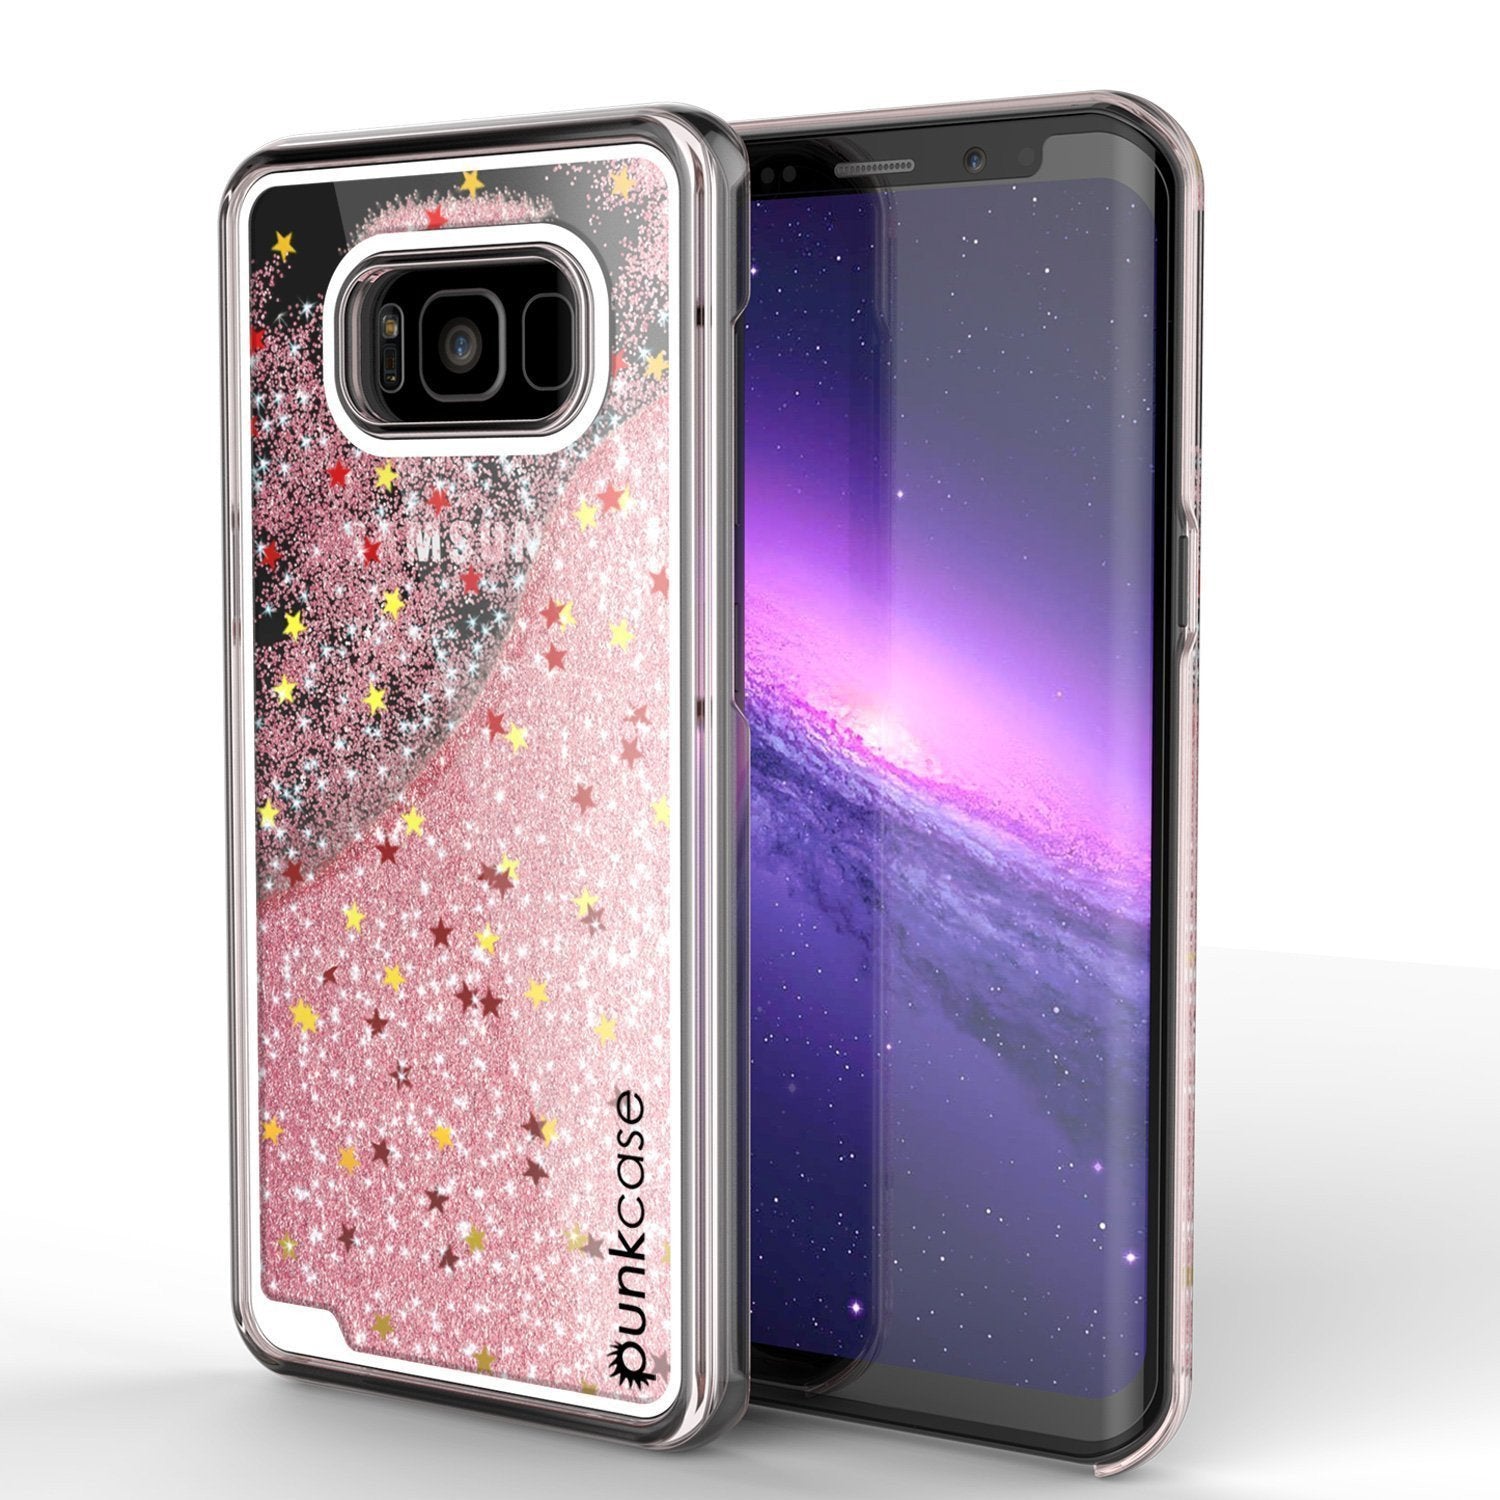 Galaxy S8 Case, Punkcase [Liquid Series] Protective Dual Layer Floating Glitter Cover with lots of Bling & Sparkle + PunkShield Screen Protector for Samsung S8 [Rose Gold]